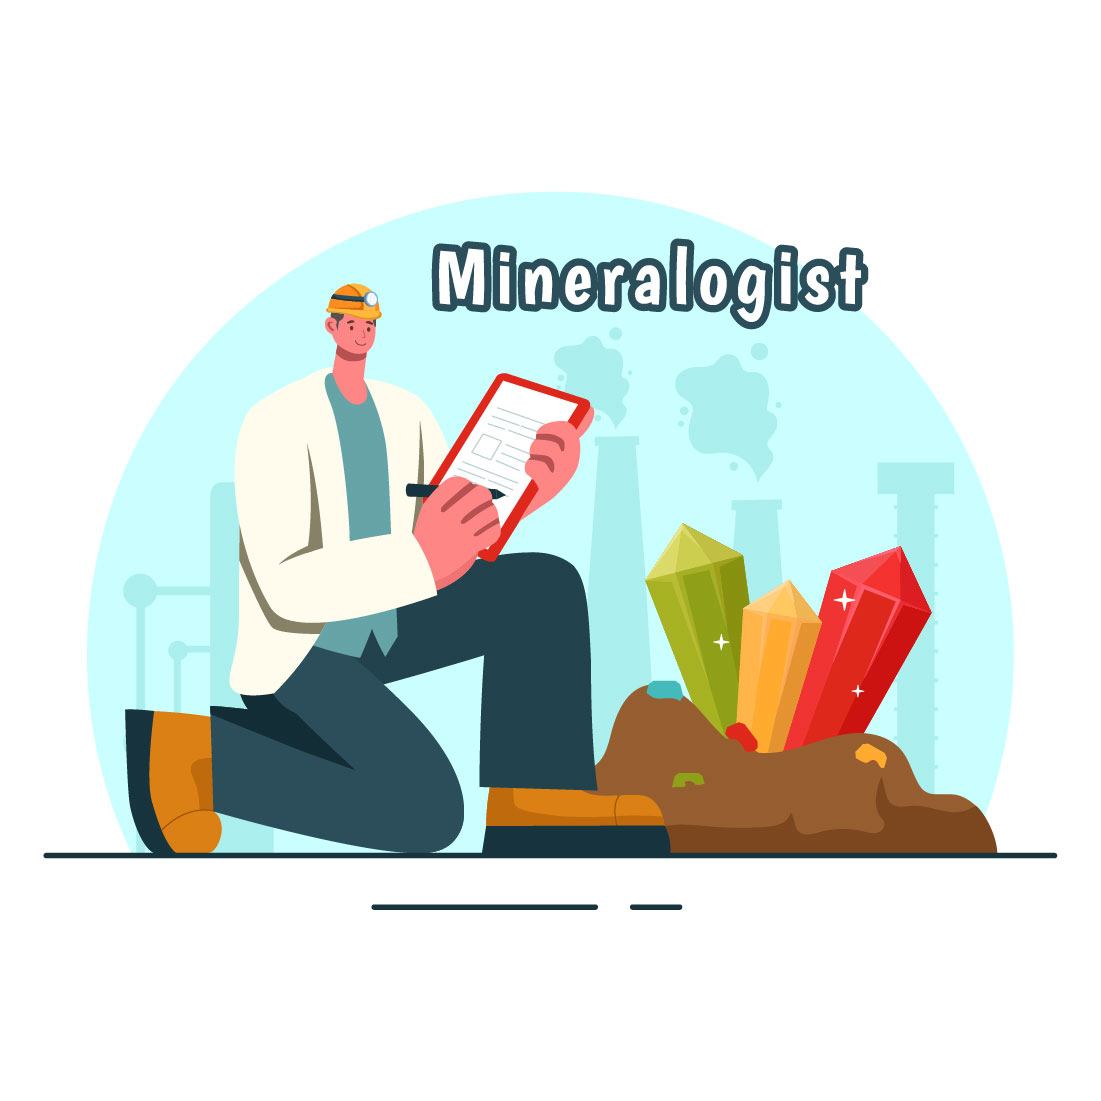 9 Mineralogist Vector Illustration cover image.